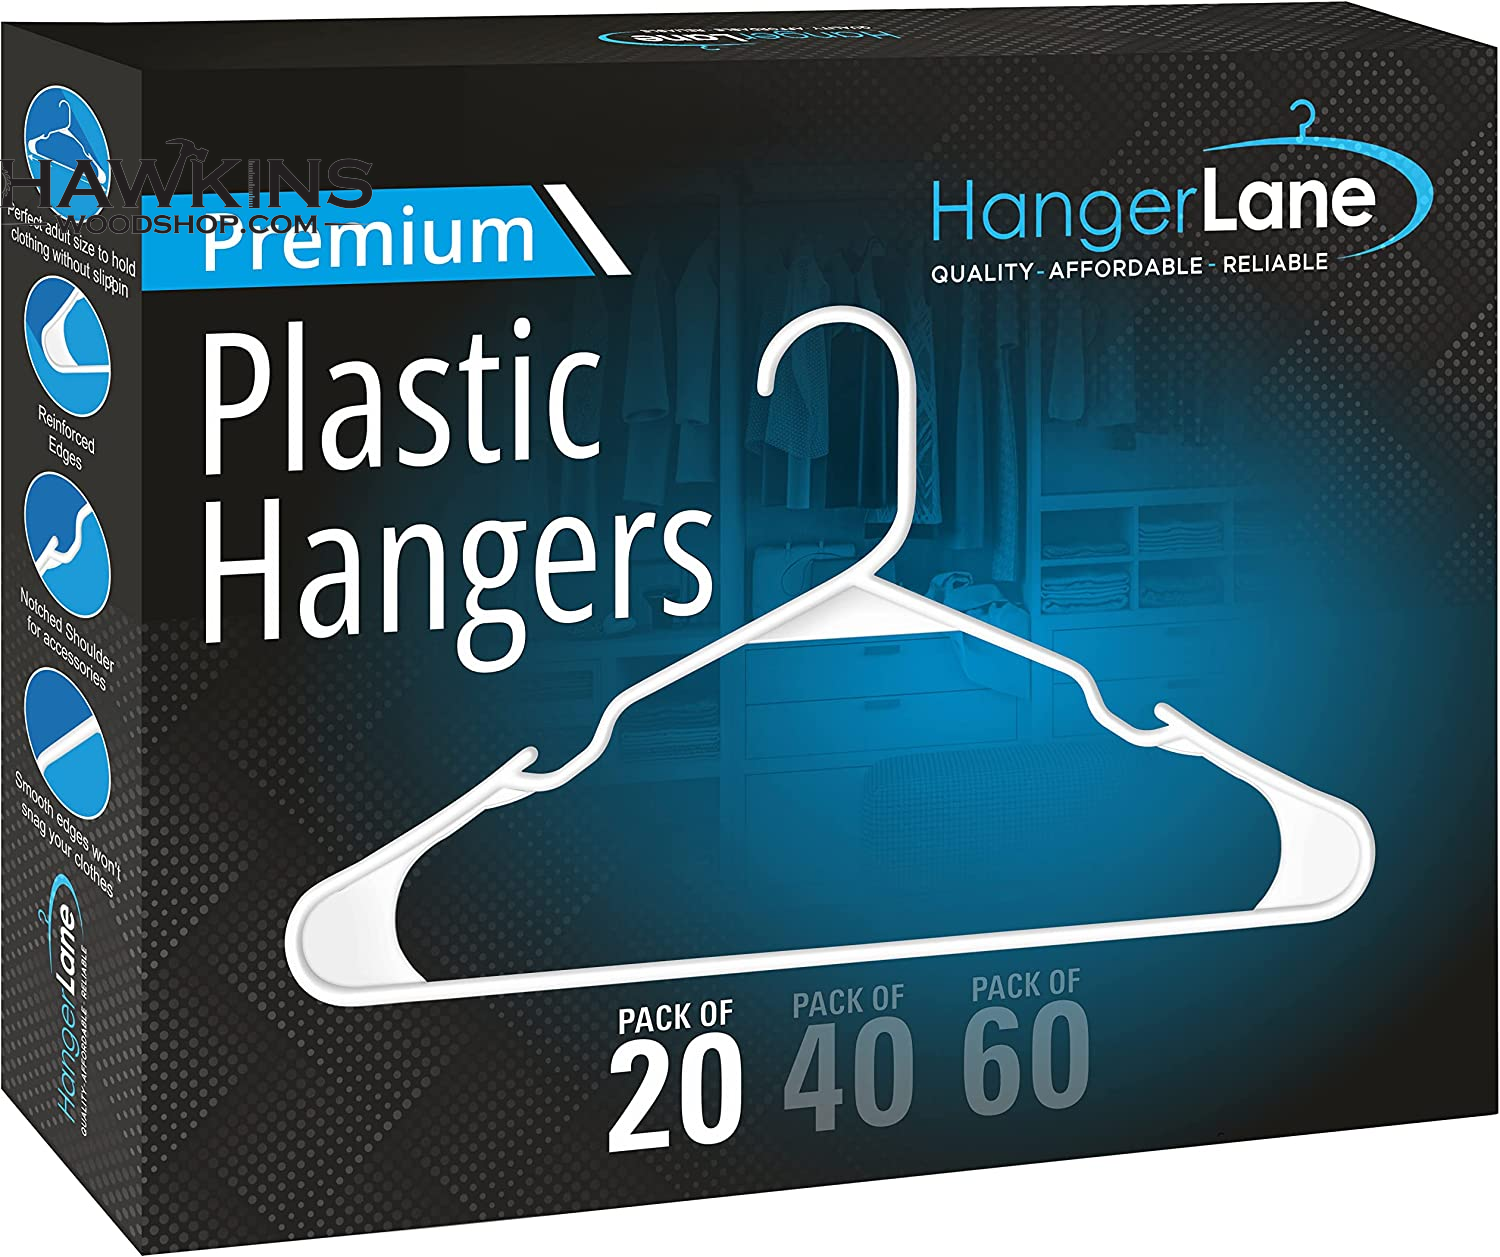 Plastic Hangers 20, 40, 60 Pack – Space Saving Hangers for Clothes – White Plastic Hangers for Neatly Hanging Clothing, Shirts, Jackets, Pants